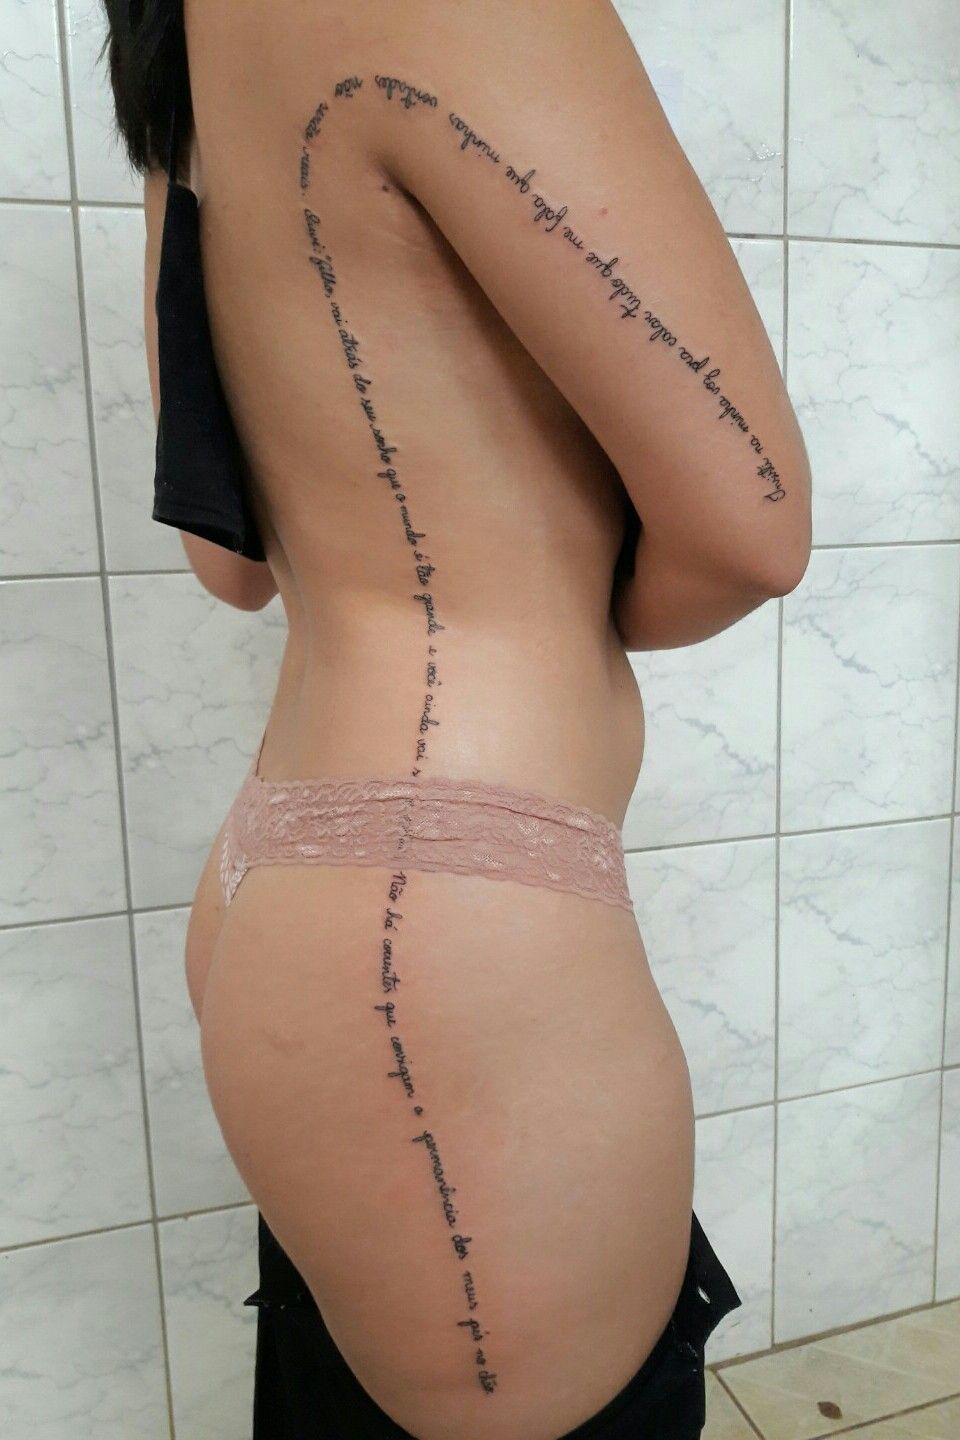 Scoliobutterfly on Twitter This is amazing scoliosis tattoo  httptcoyNB4QQNog4  Twitter